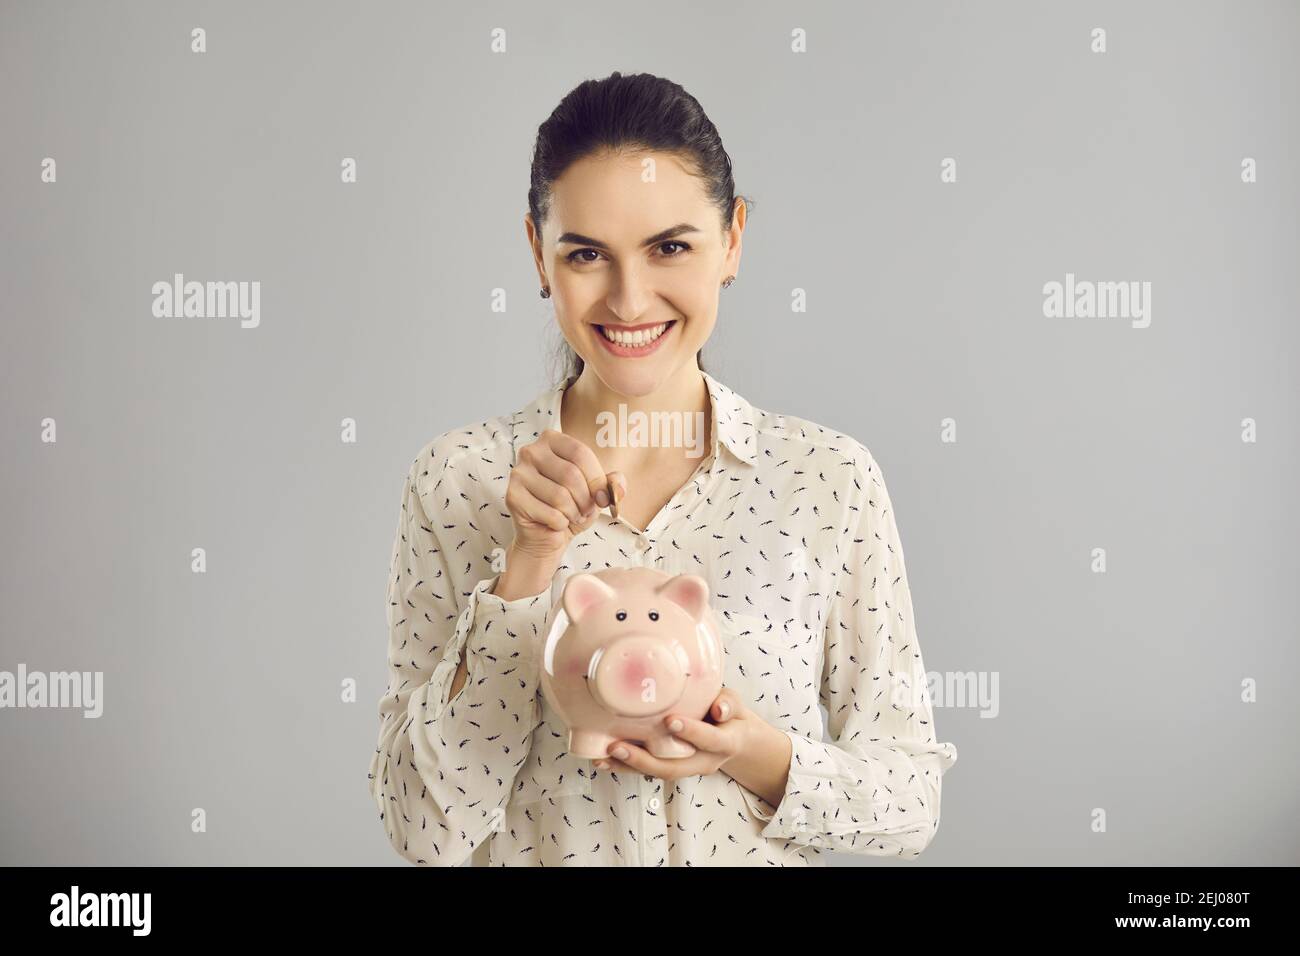 Woman looks at the camera and puts a coin in a piggy bank while standing on a gray background. Stock Photo